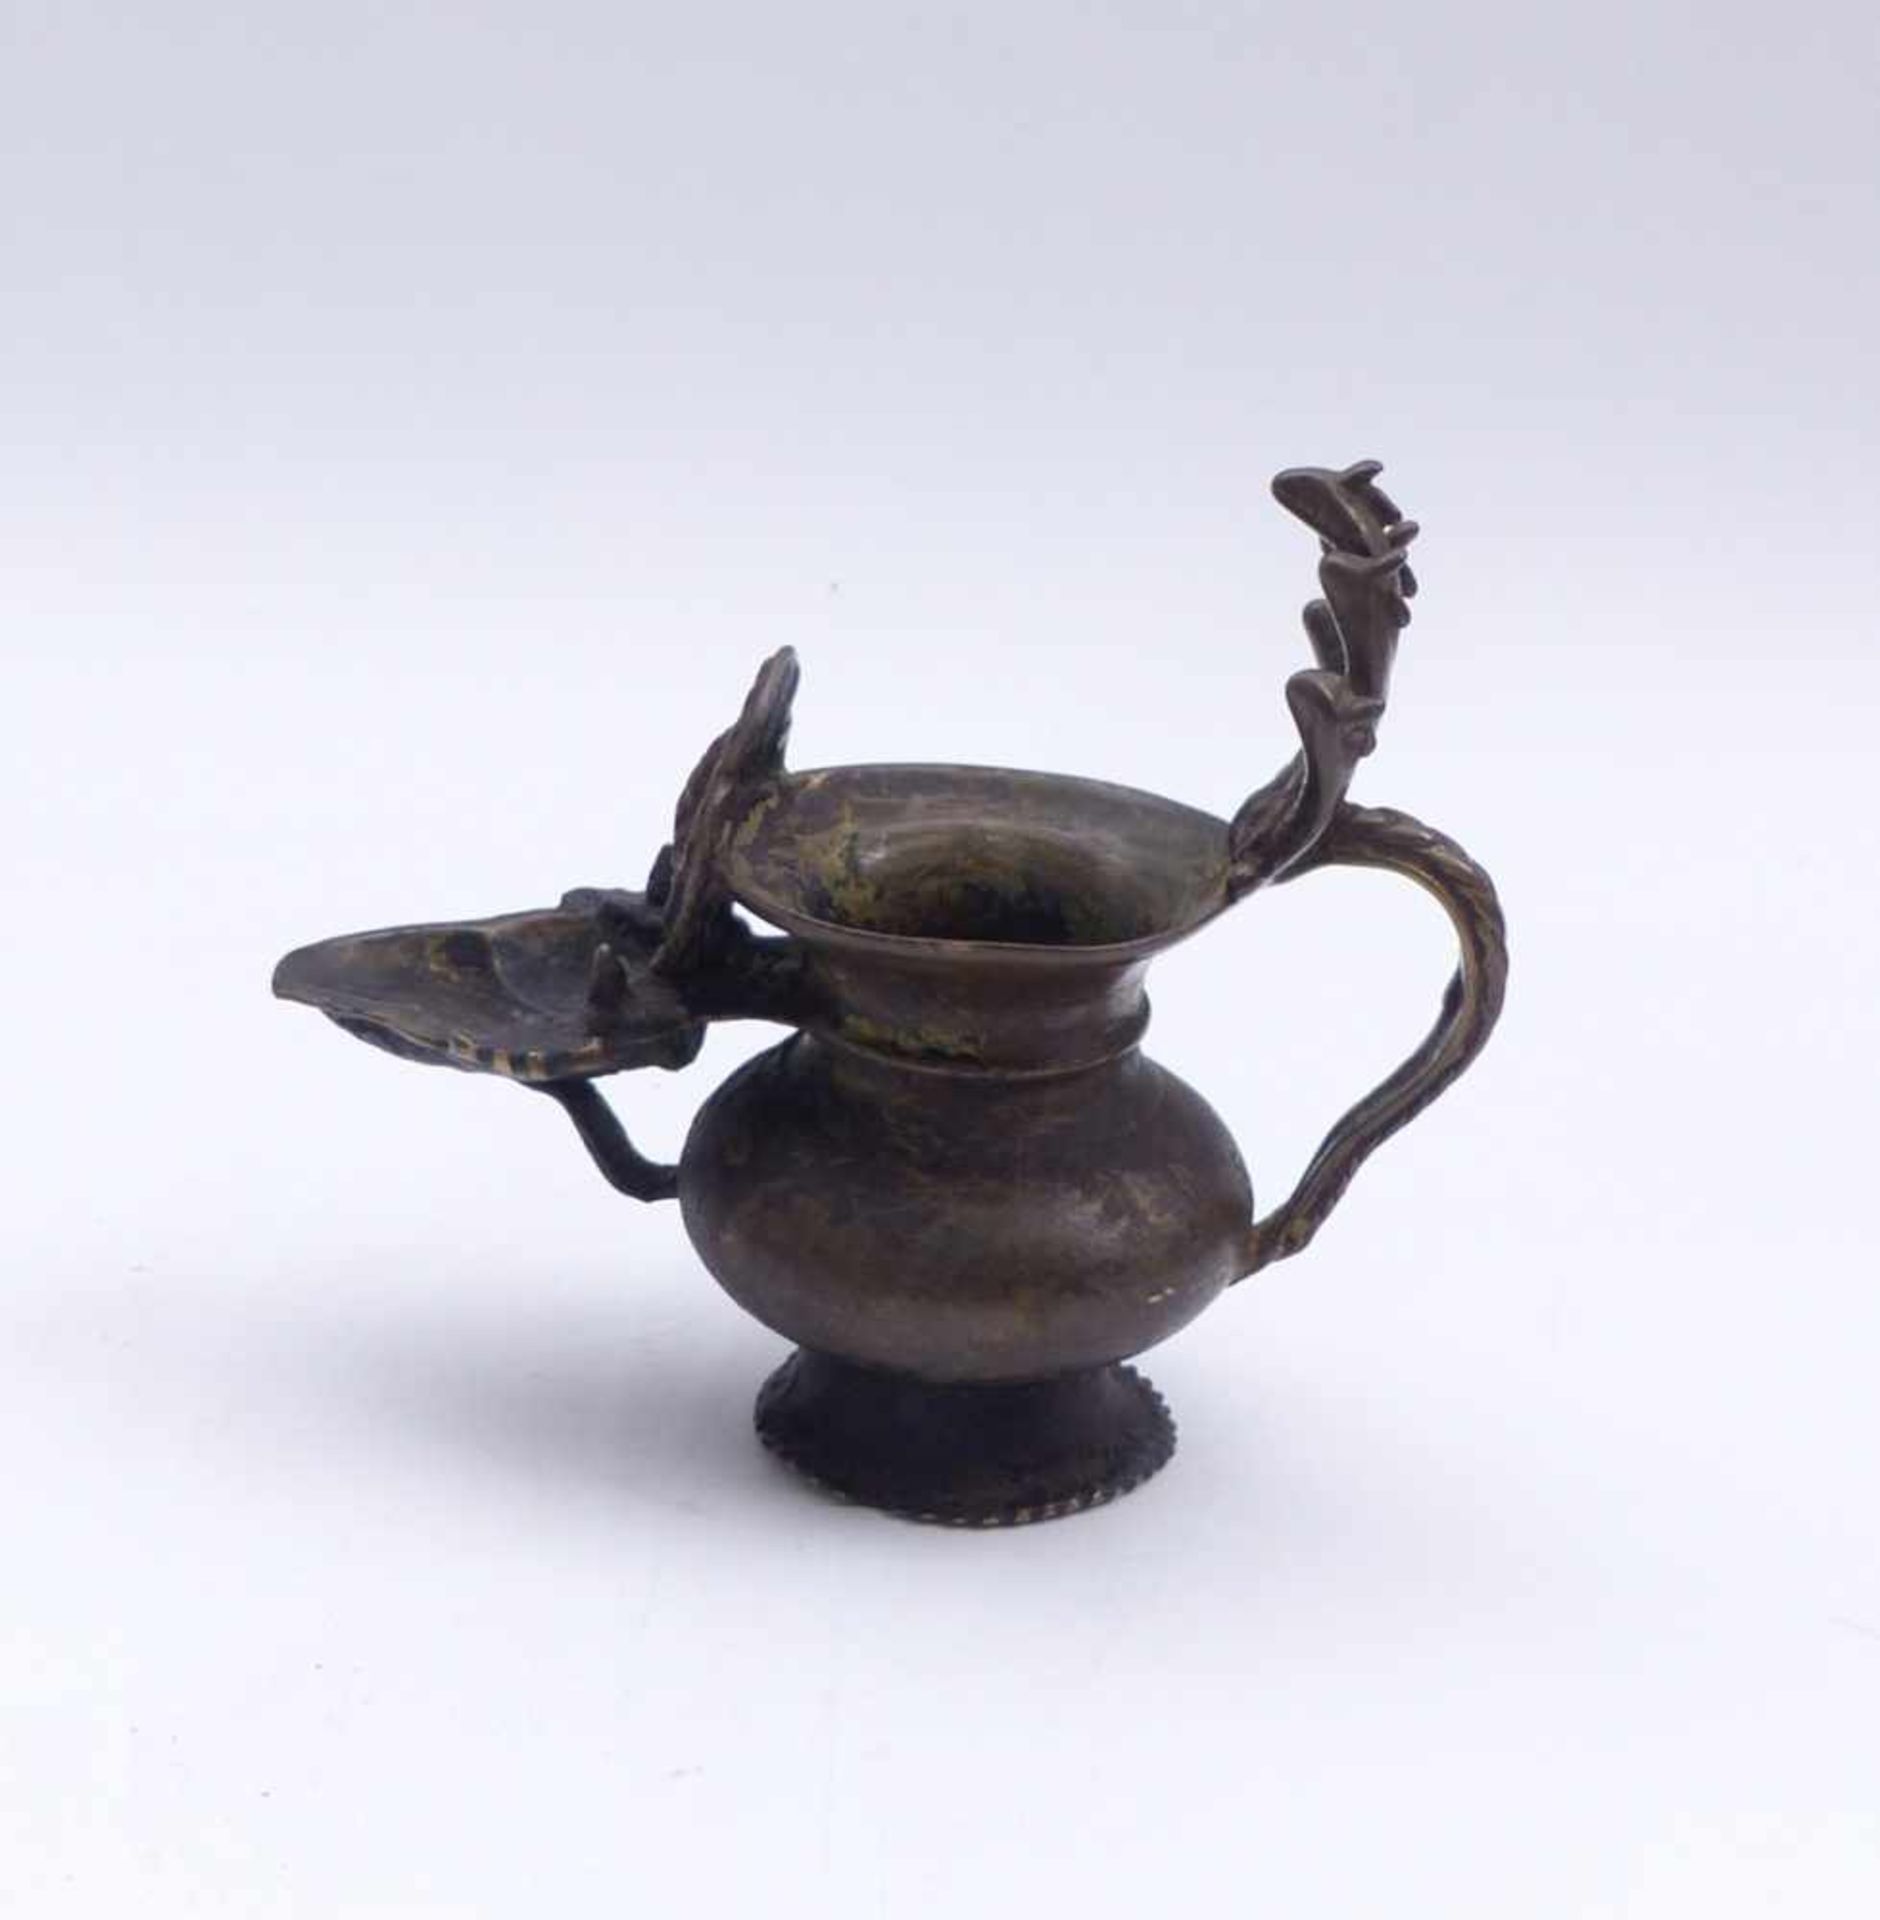 Oil lampIndiaFive-headed standing cobra on the leaf handle, curved wick bowl with Ganesha in